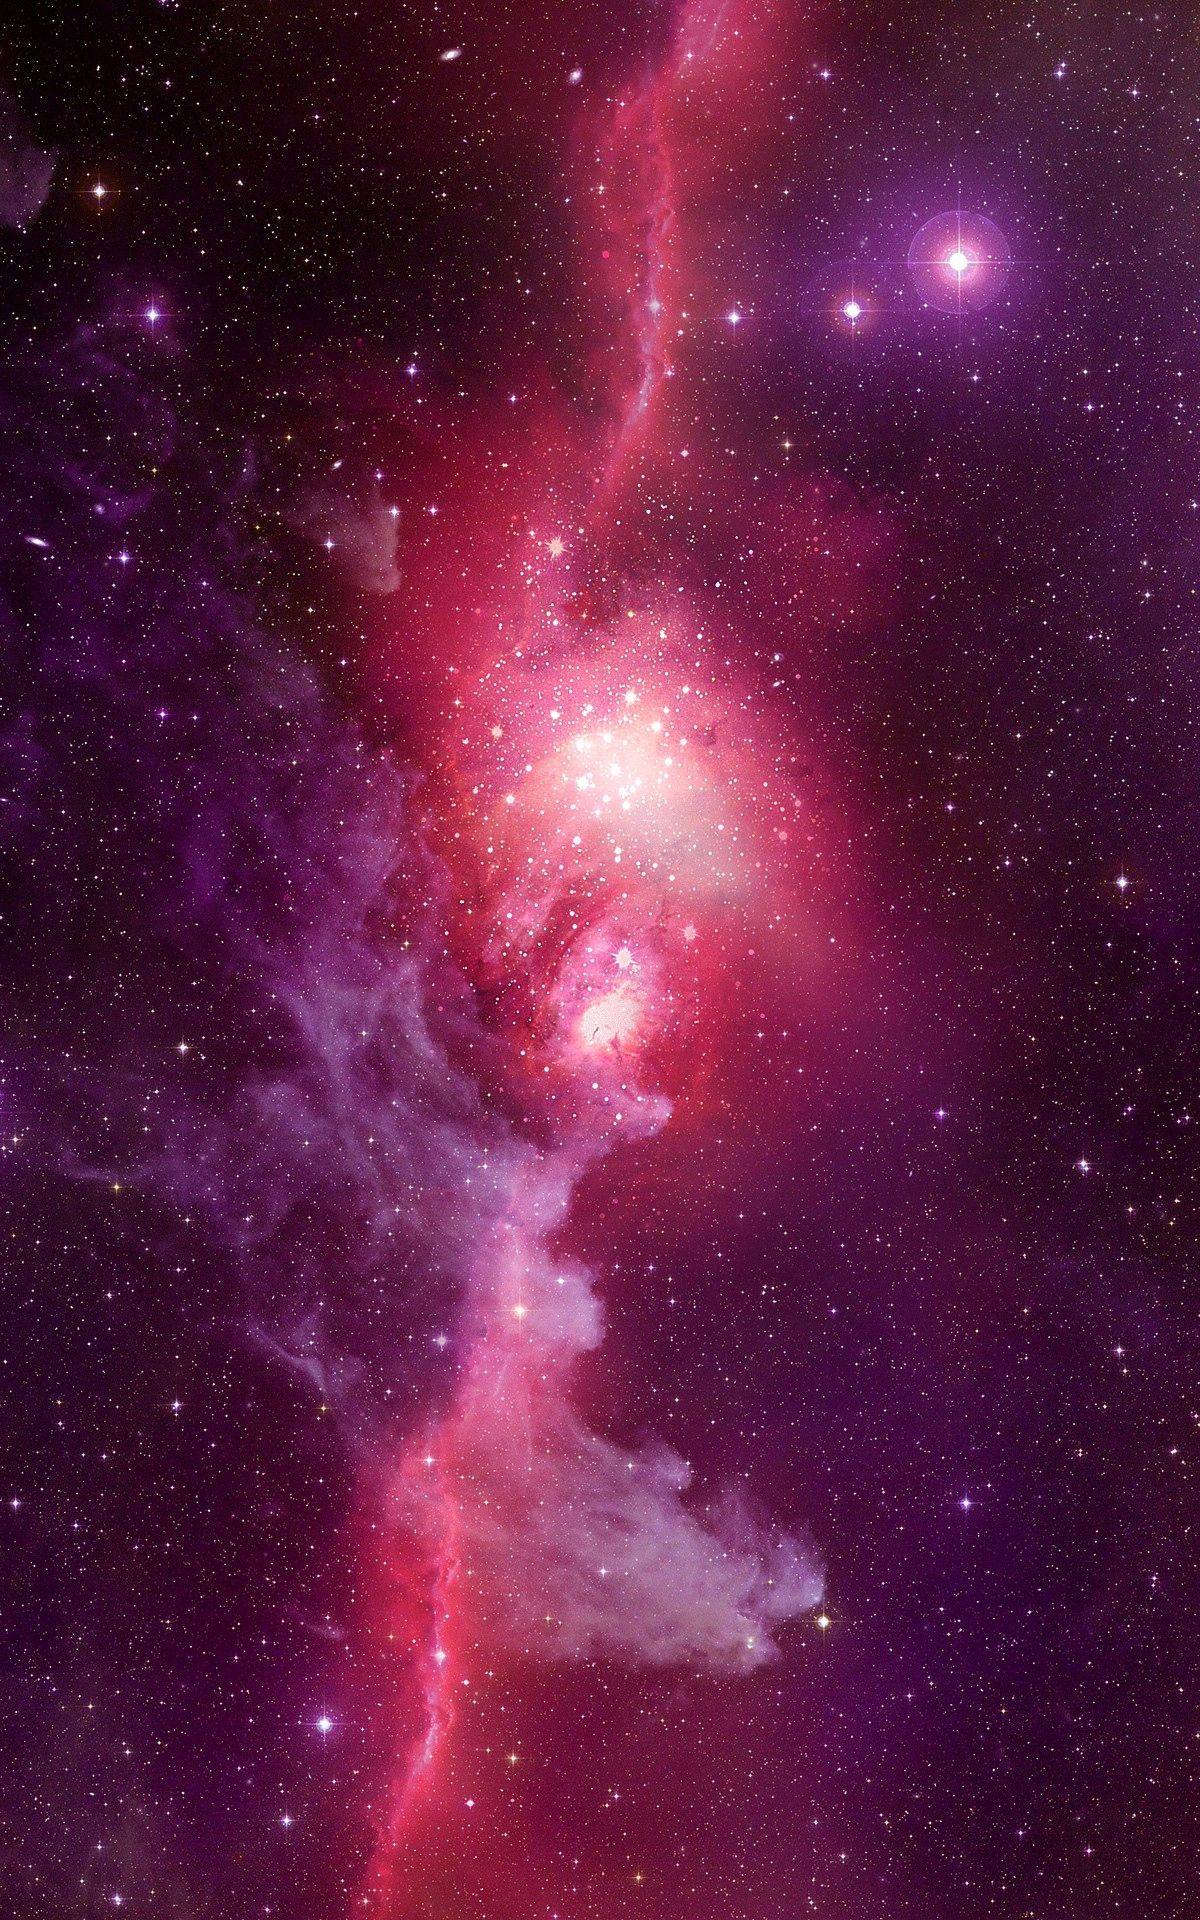 New Pink Galaxy Wallpaper Of the Day of The Hudson